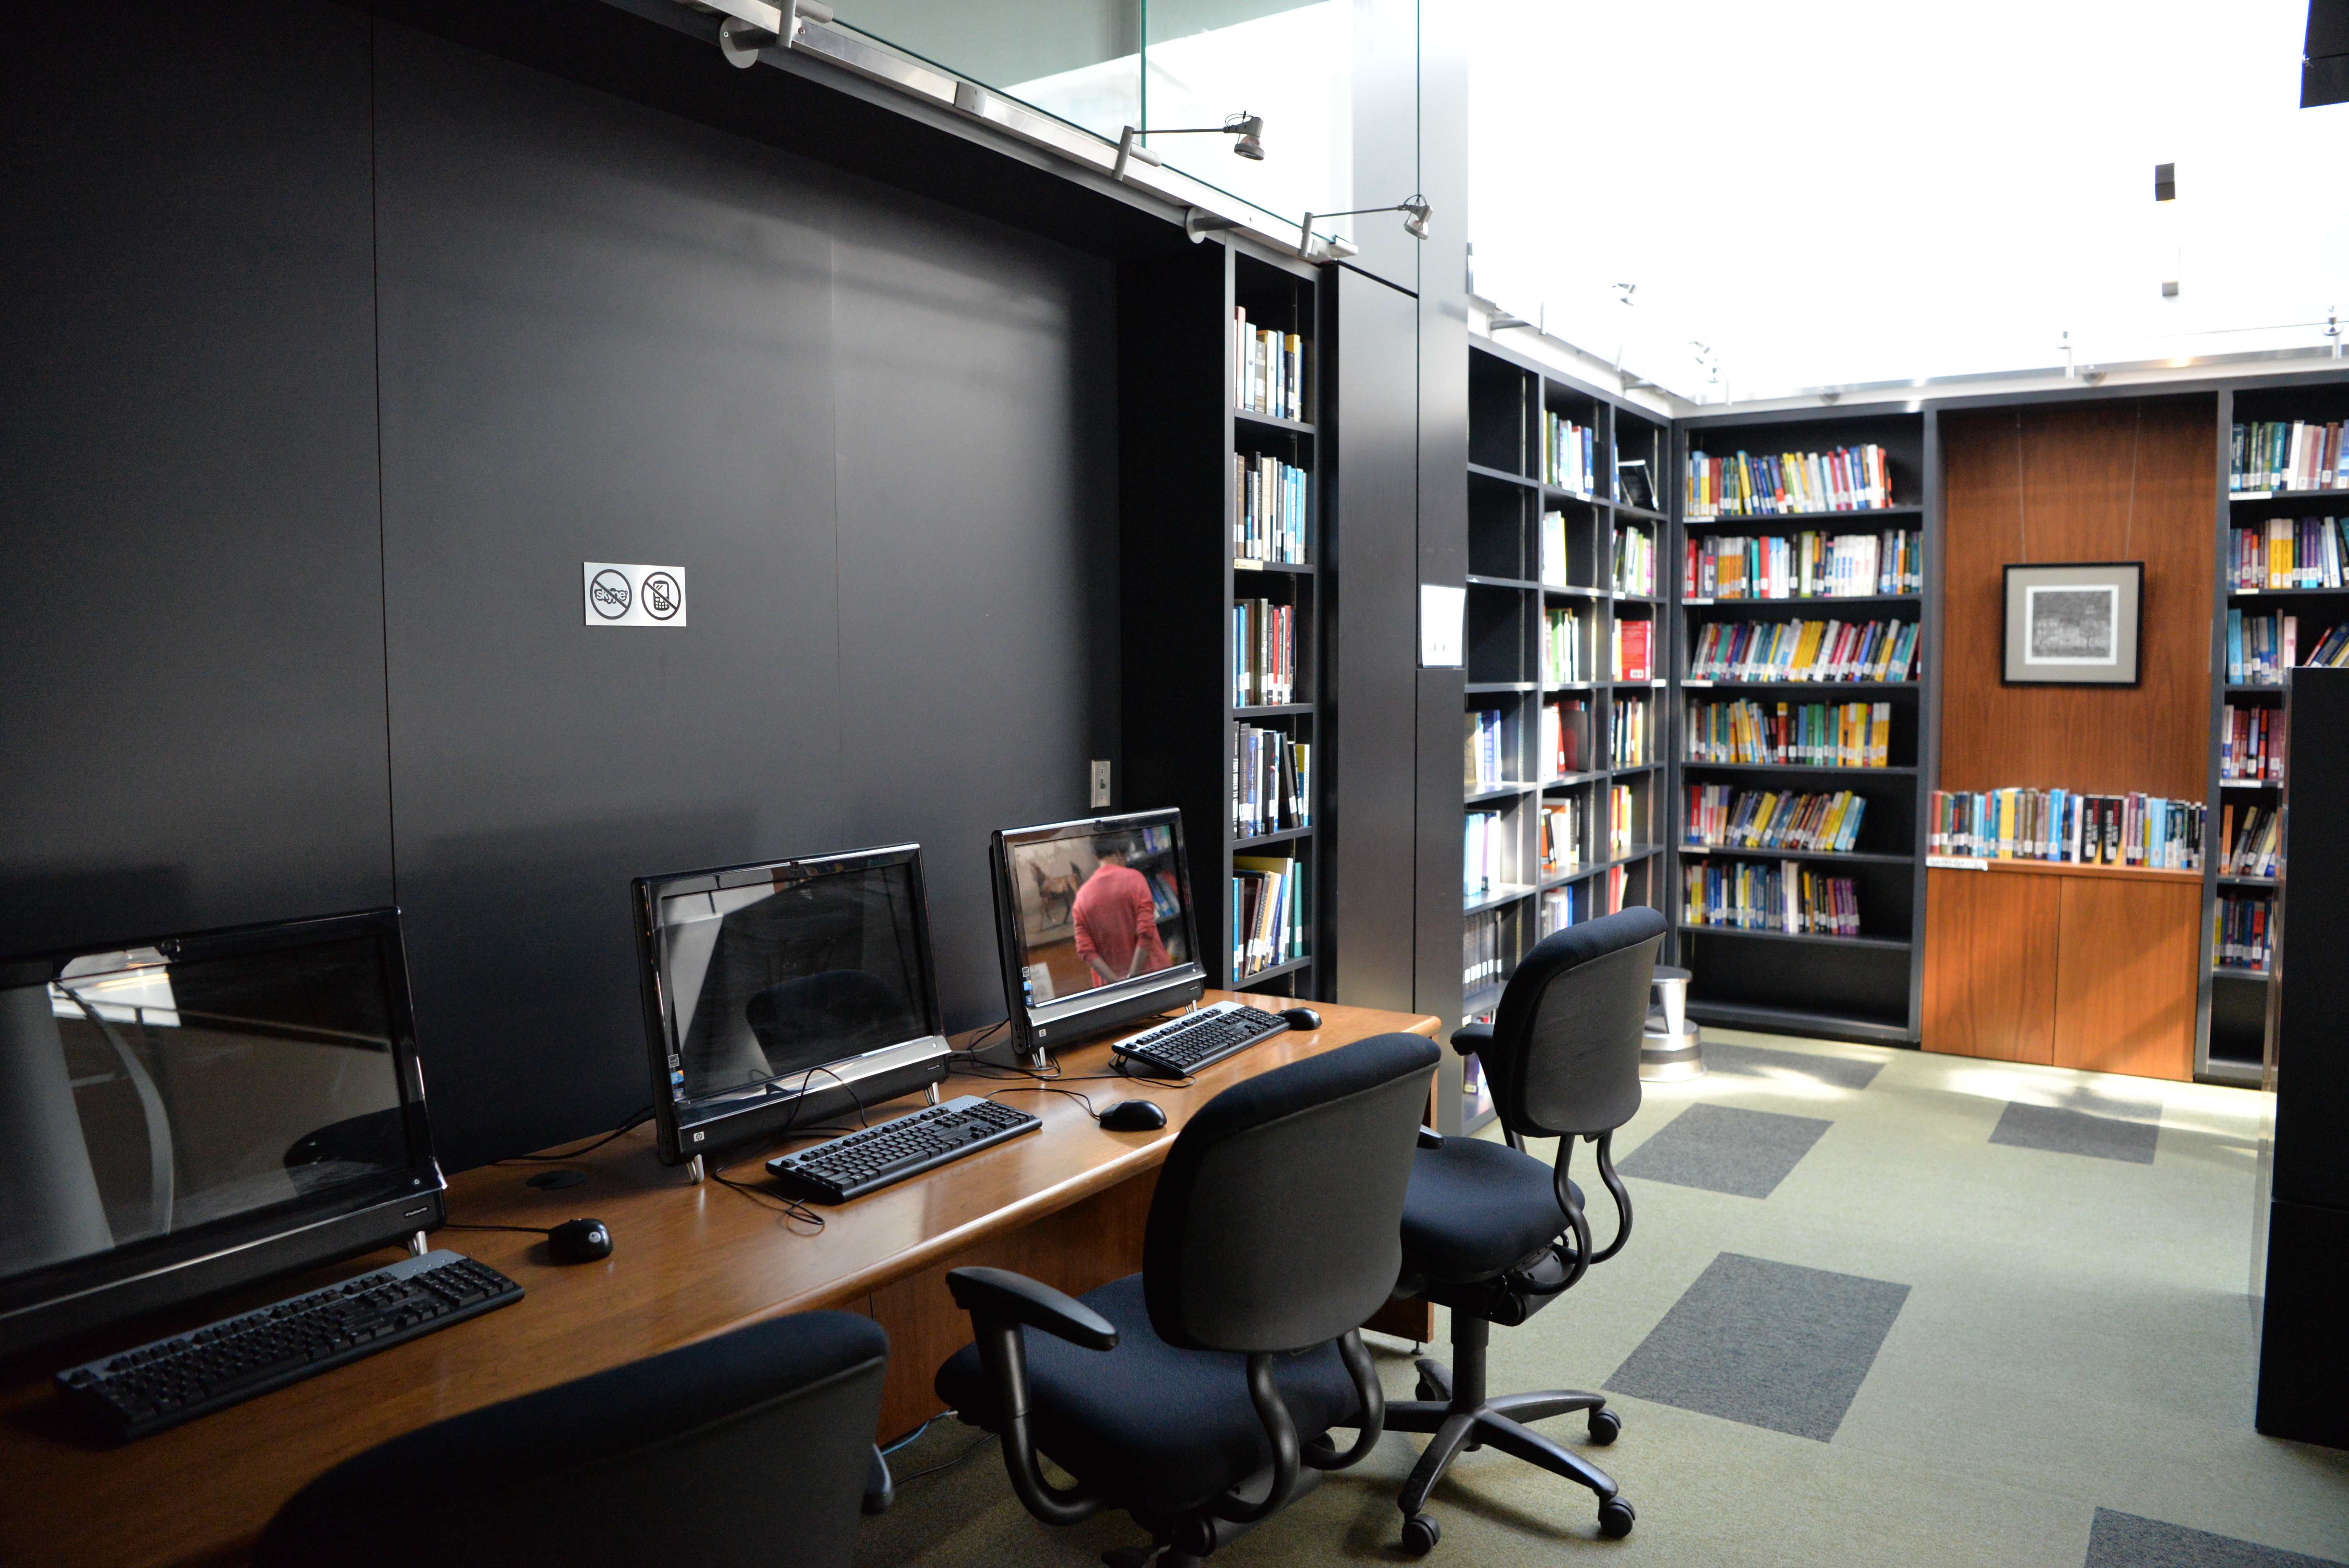 Perimeter Institute's library with workspaces